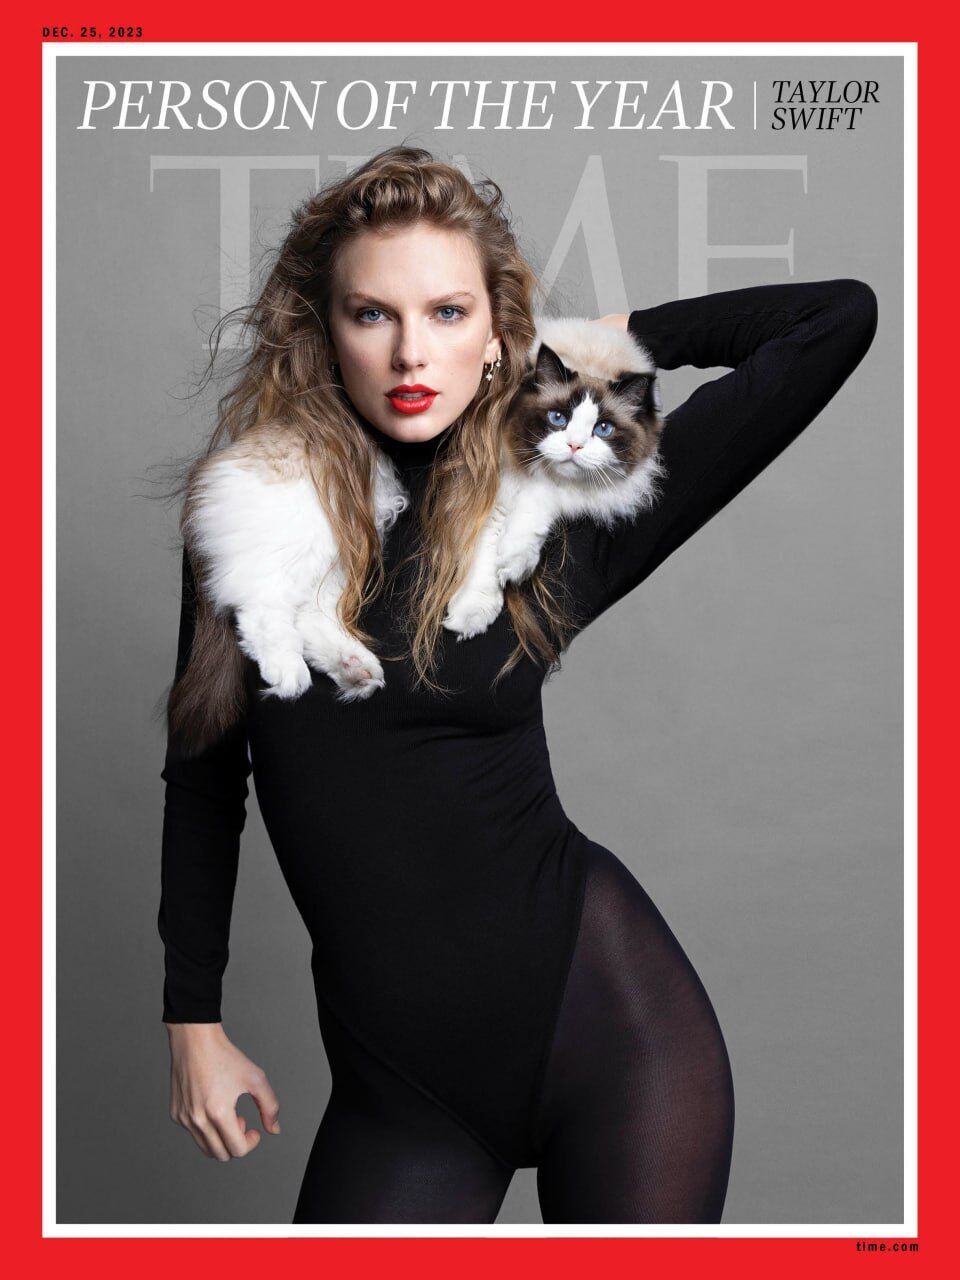 Taylor Swift is named Time's Person of the Year: the singer's competitors were Barbie and Putin